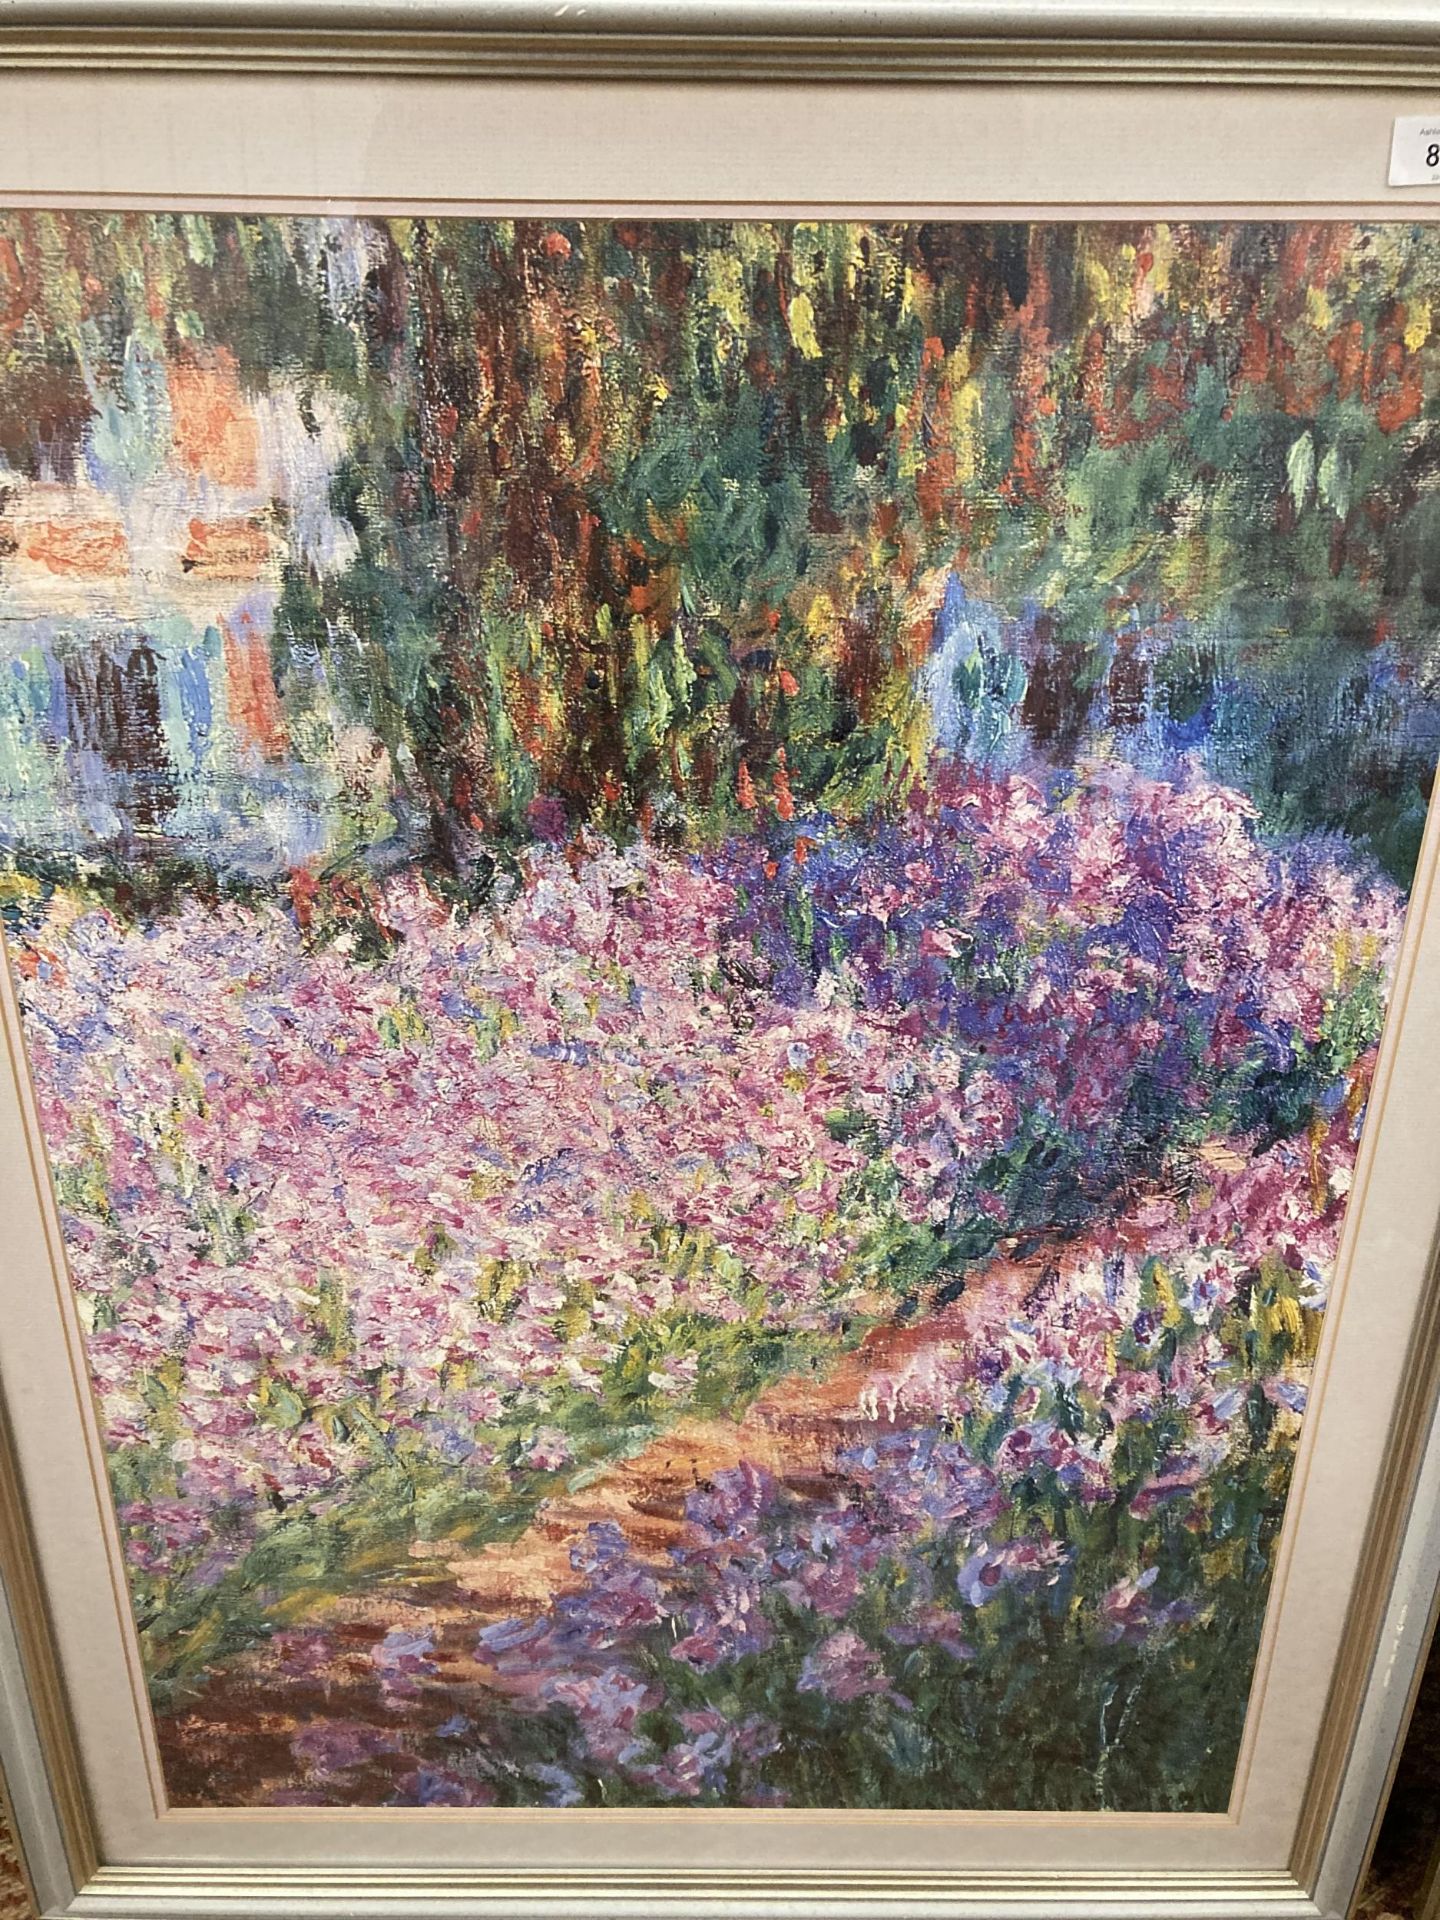 A LARGE FRAMED CLAUDE MONET PRINT 'THE ARTIST'S GARDEN AT GIVERNY', 37CM X 99CM - Image 2 of 3